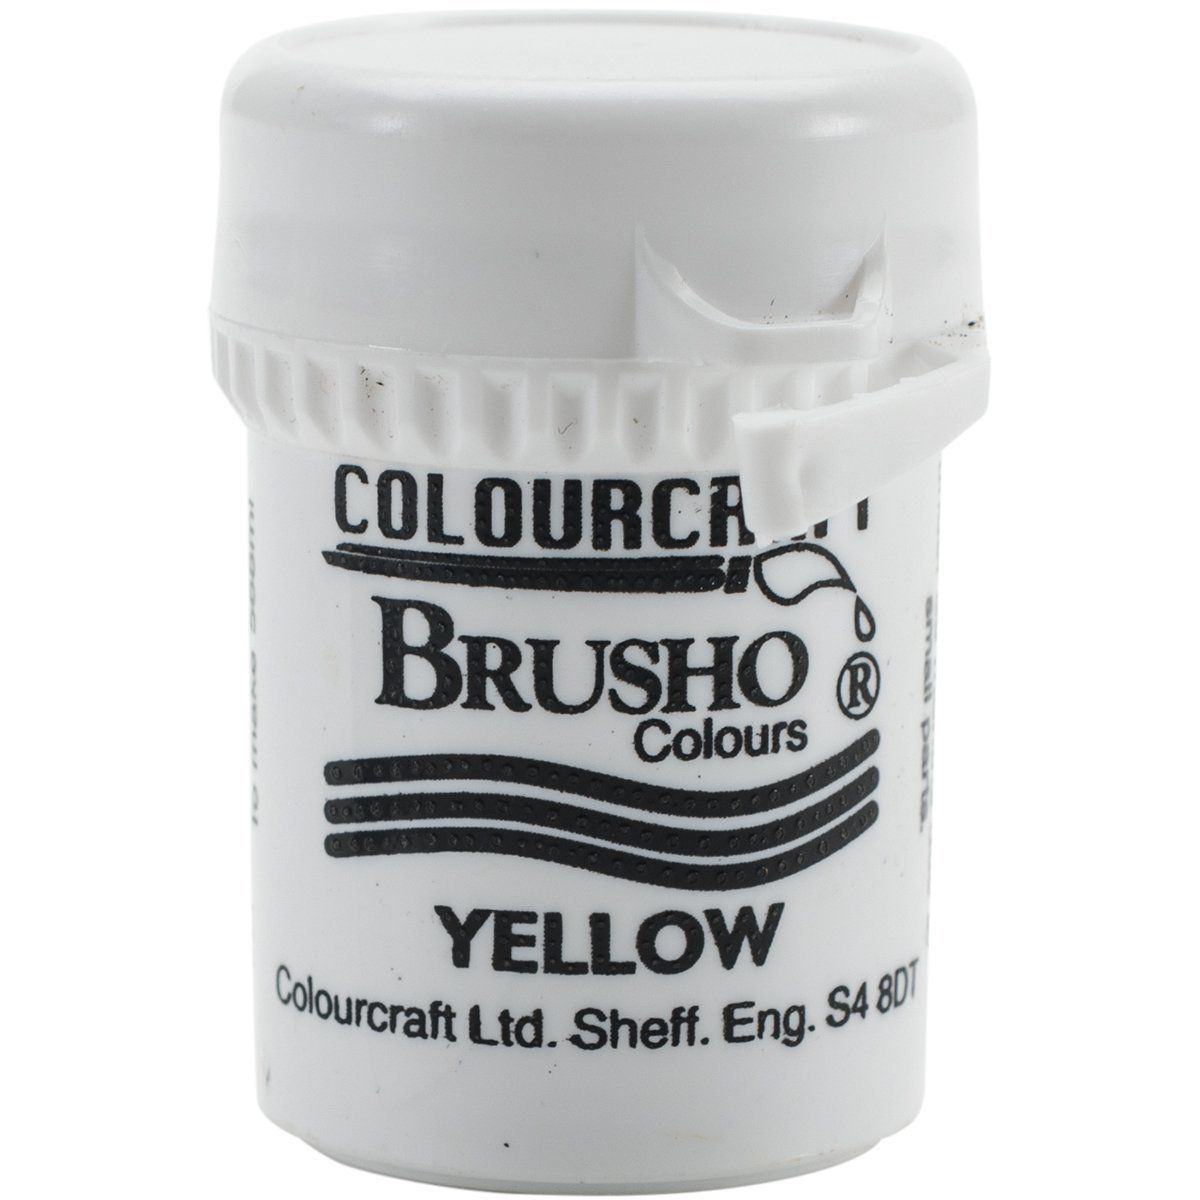 Brusho Crystal Colour - Yellow 15 gm